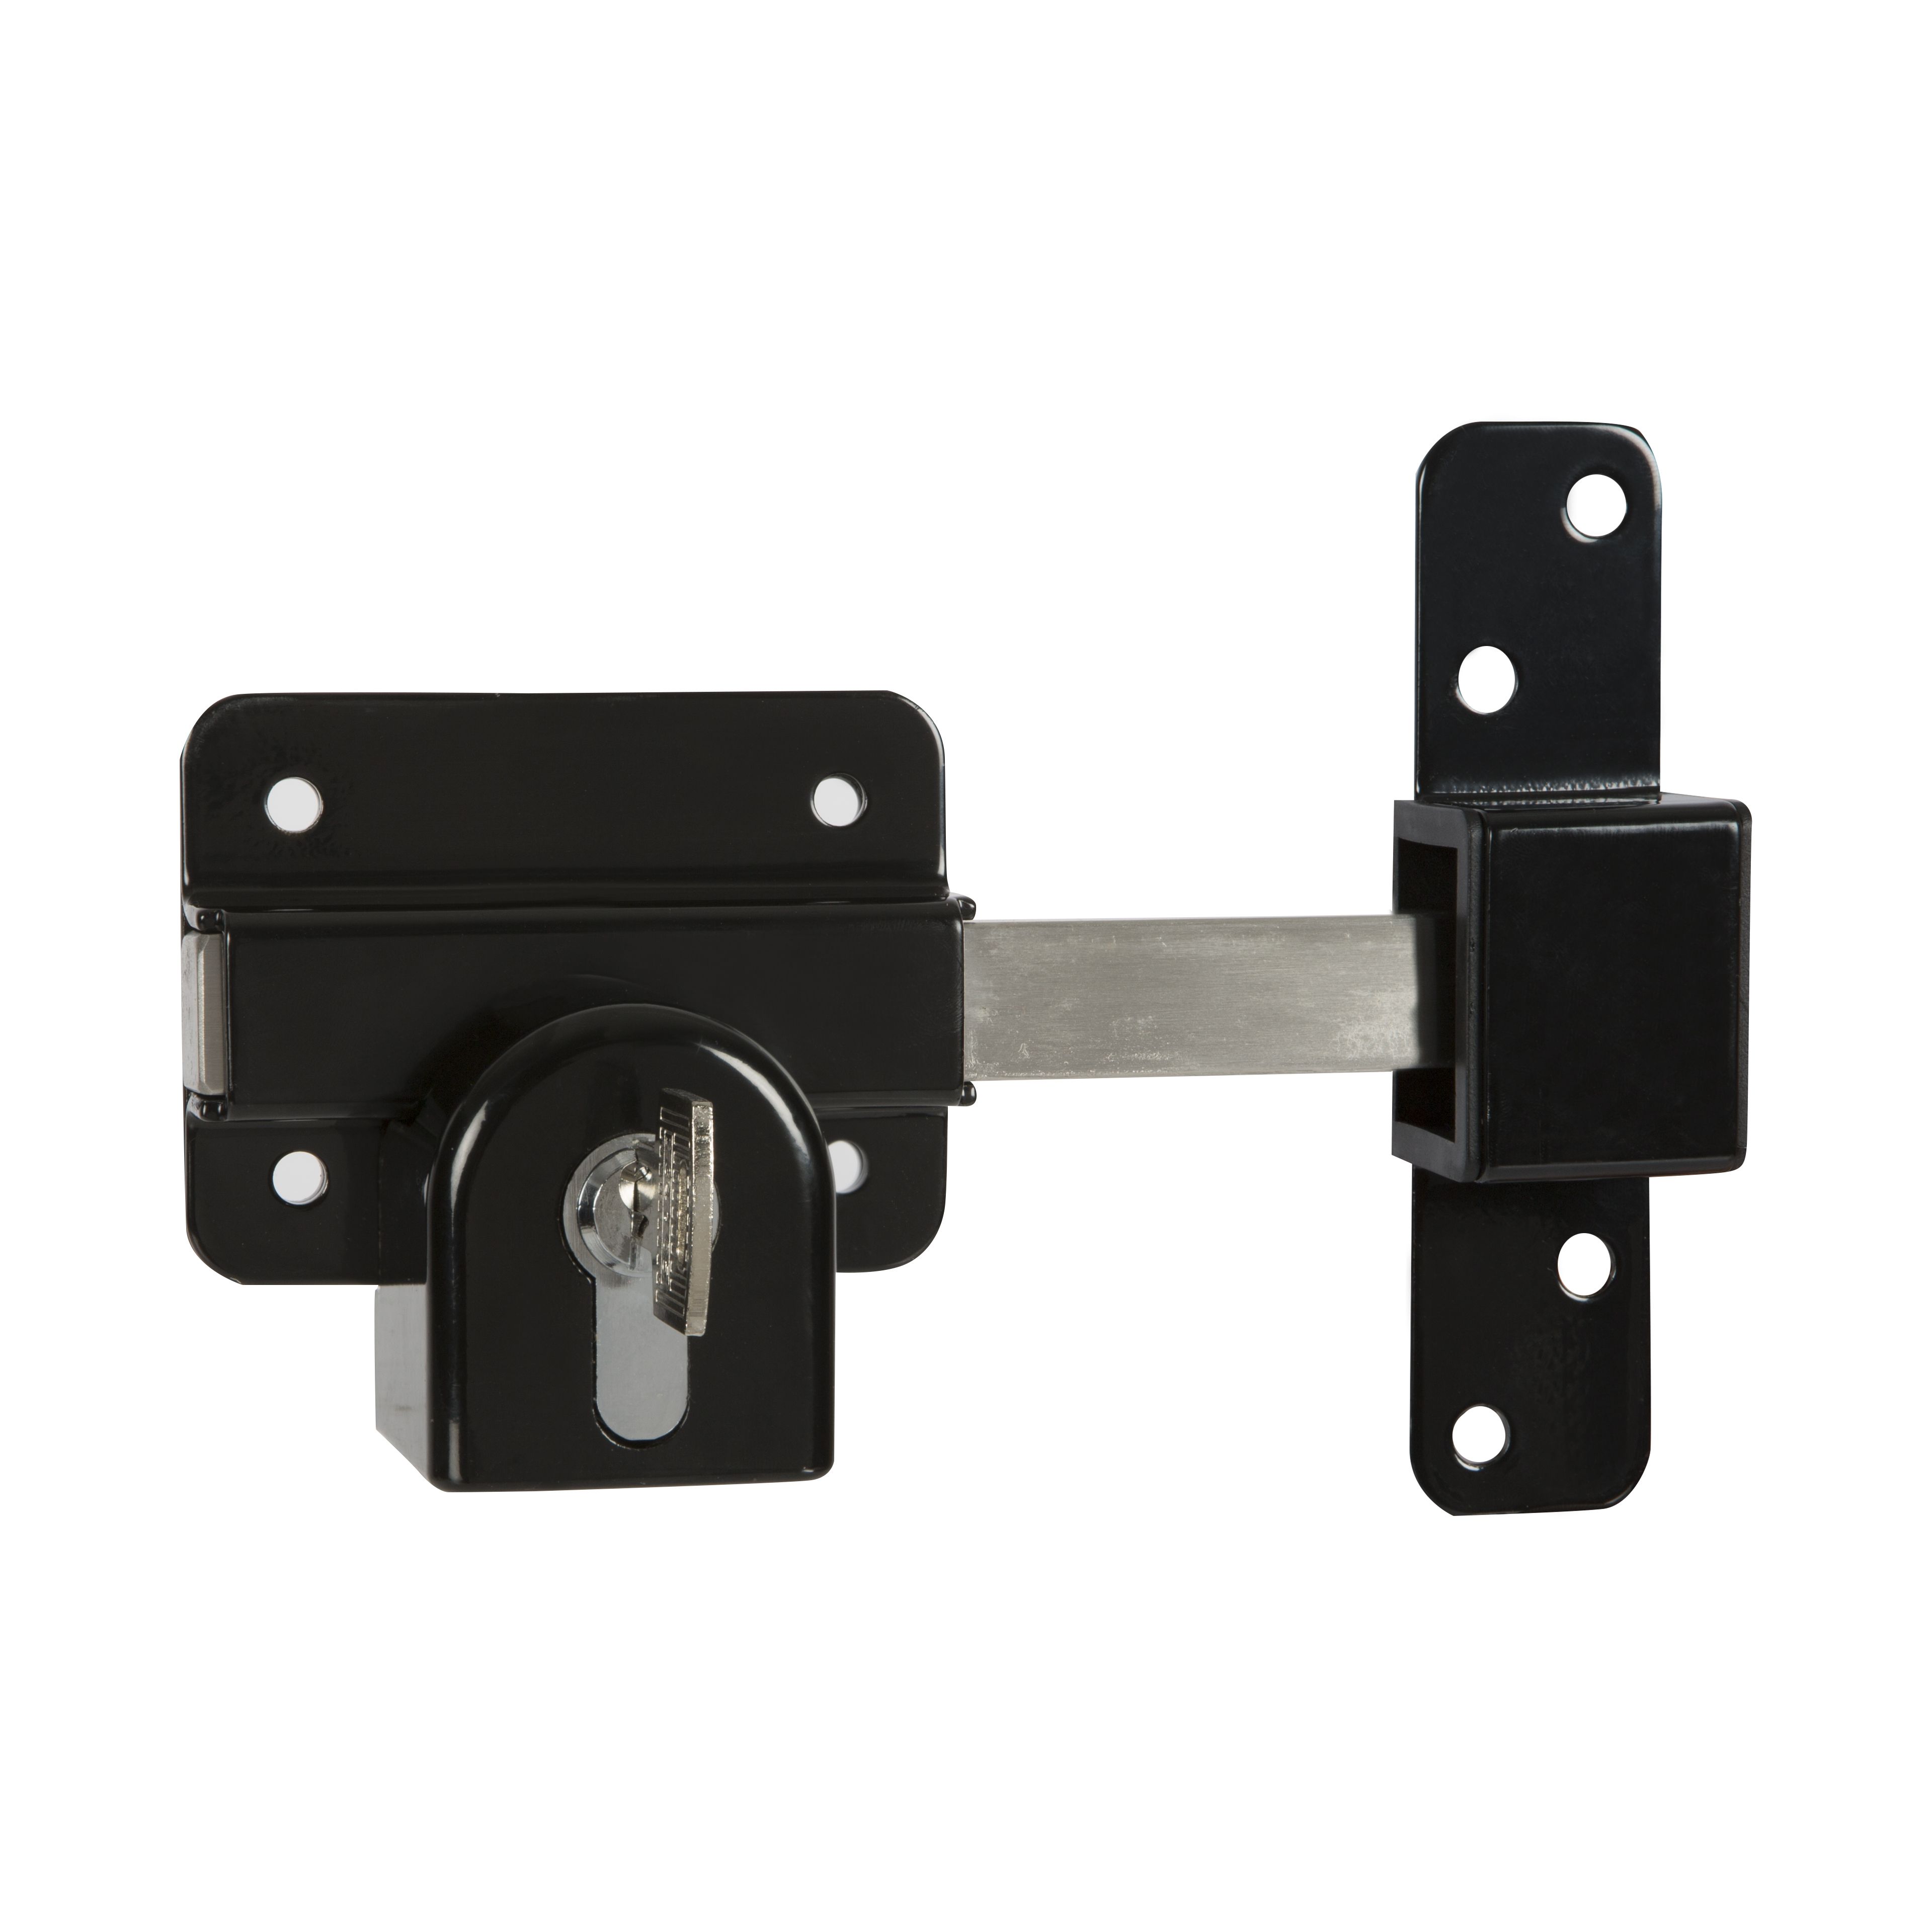 GateMate Black Stainless steel Euro Double locking long throw Barrel Gate bolt, (L)87mm (BL)70mm